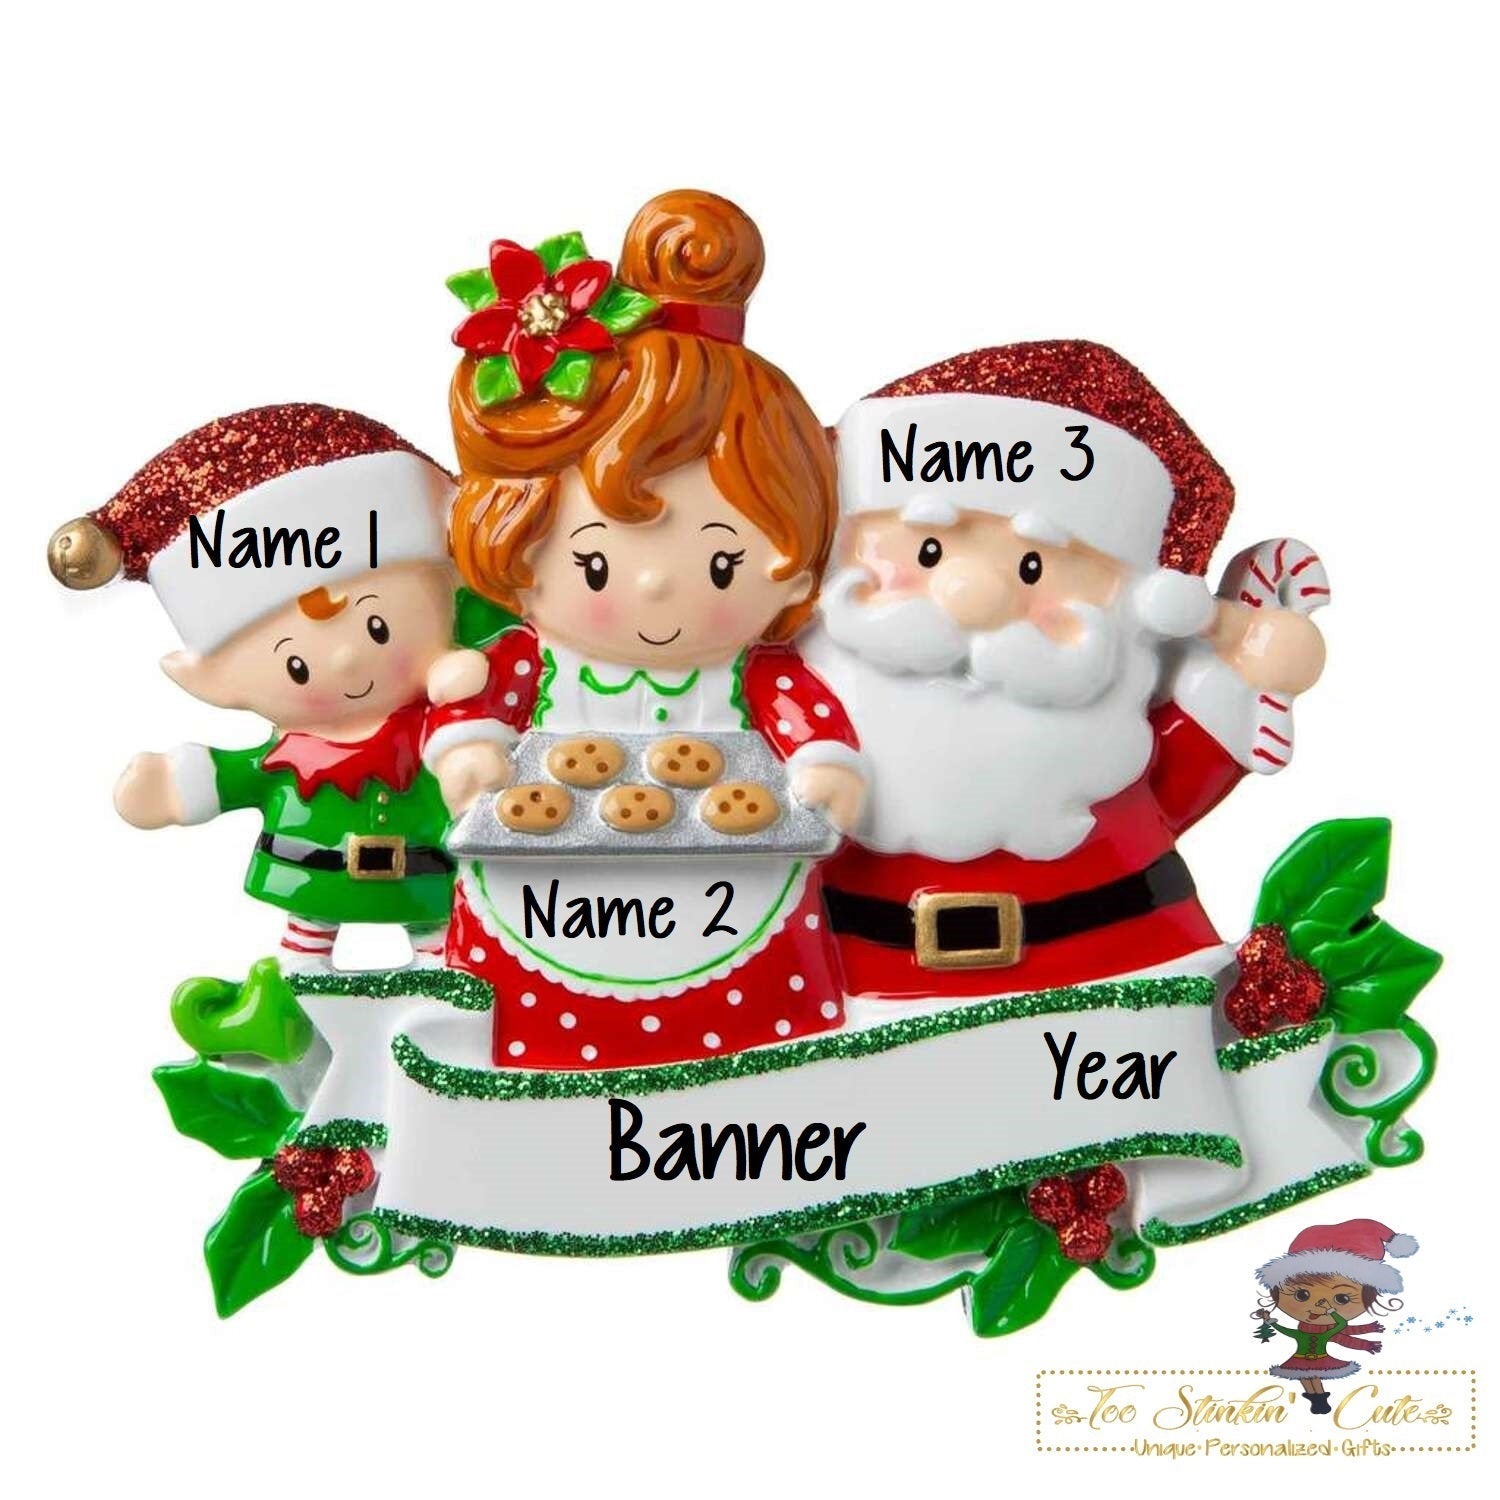 Personalized Christmas Ornament Mr. and Mrs. Claus Family of 3 + Free Shipping!